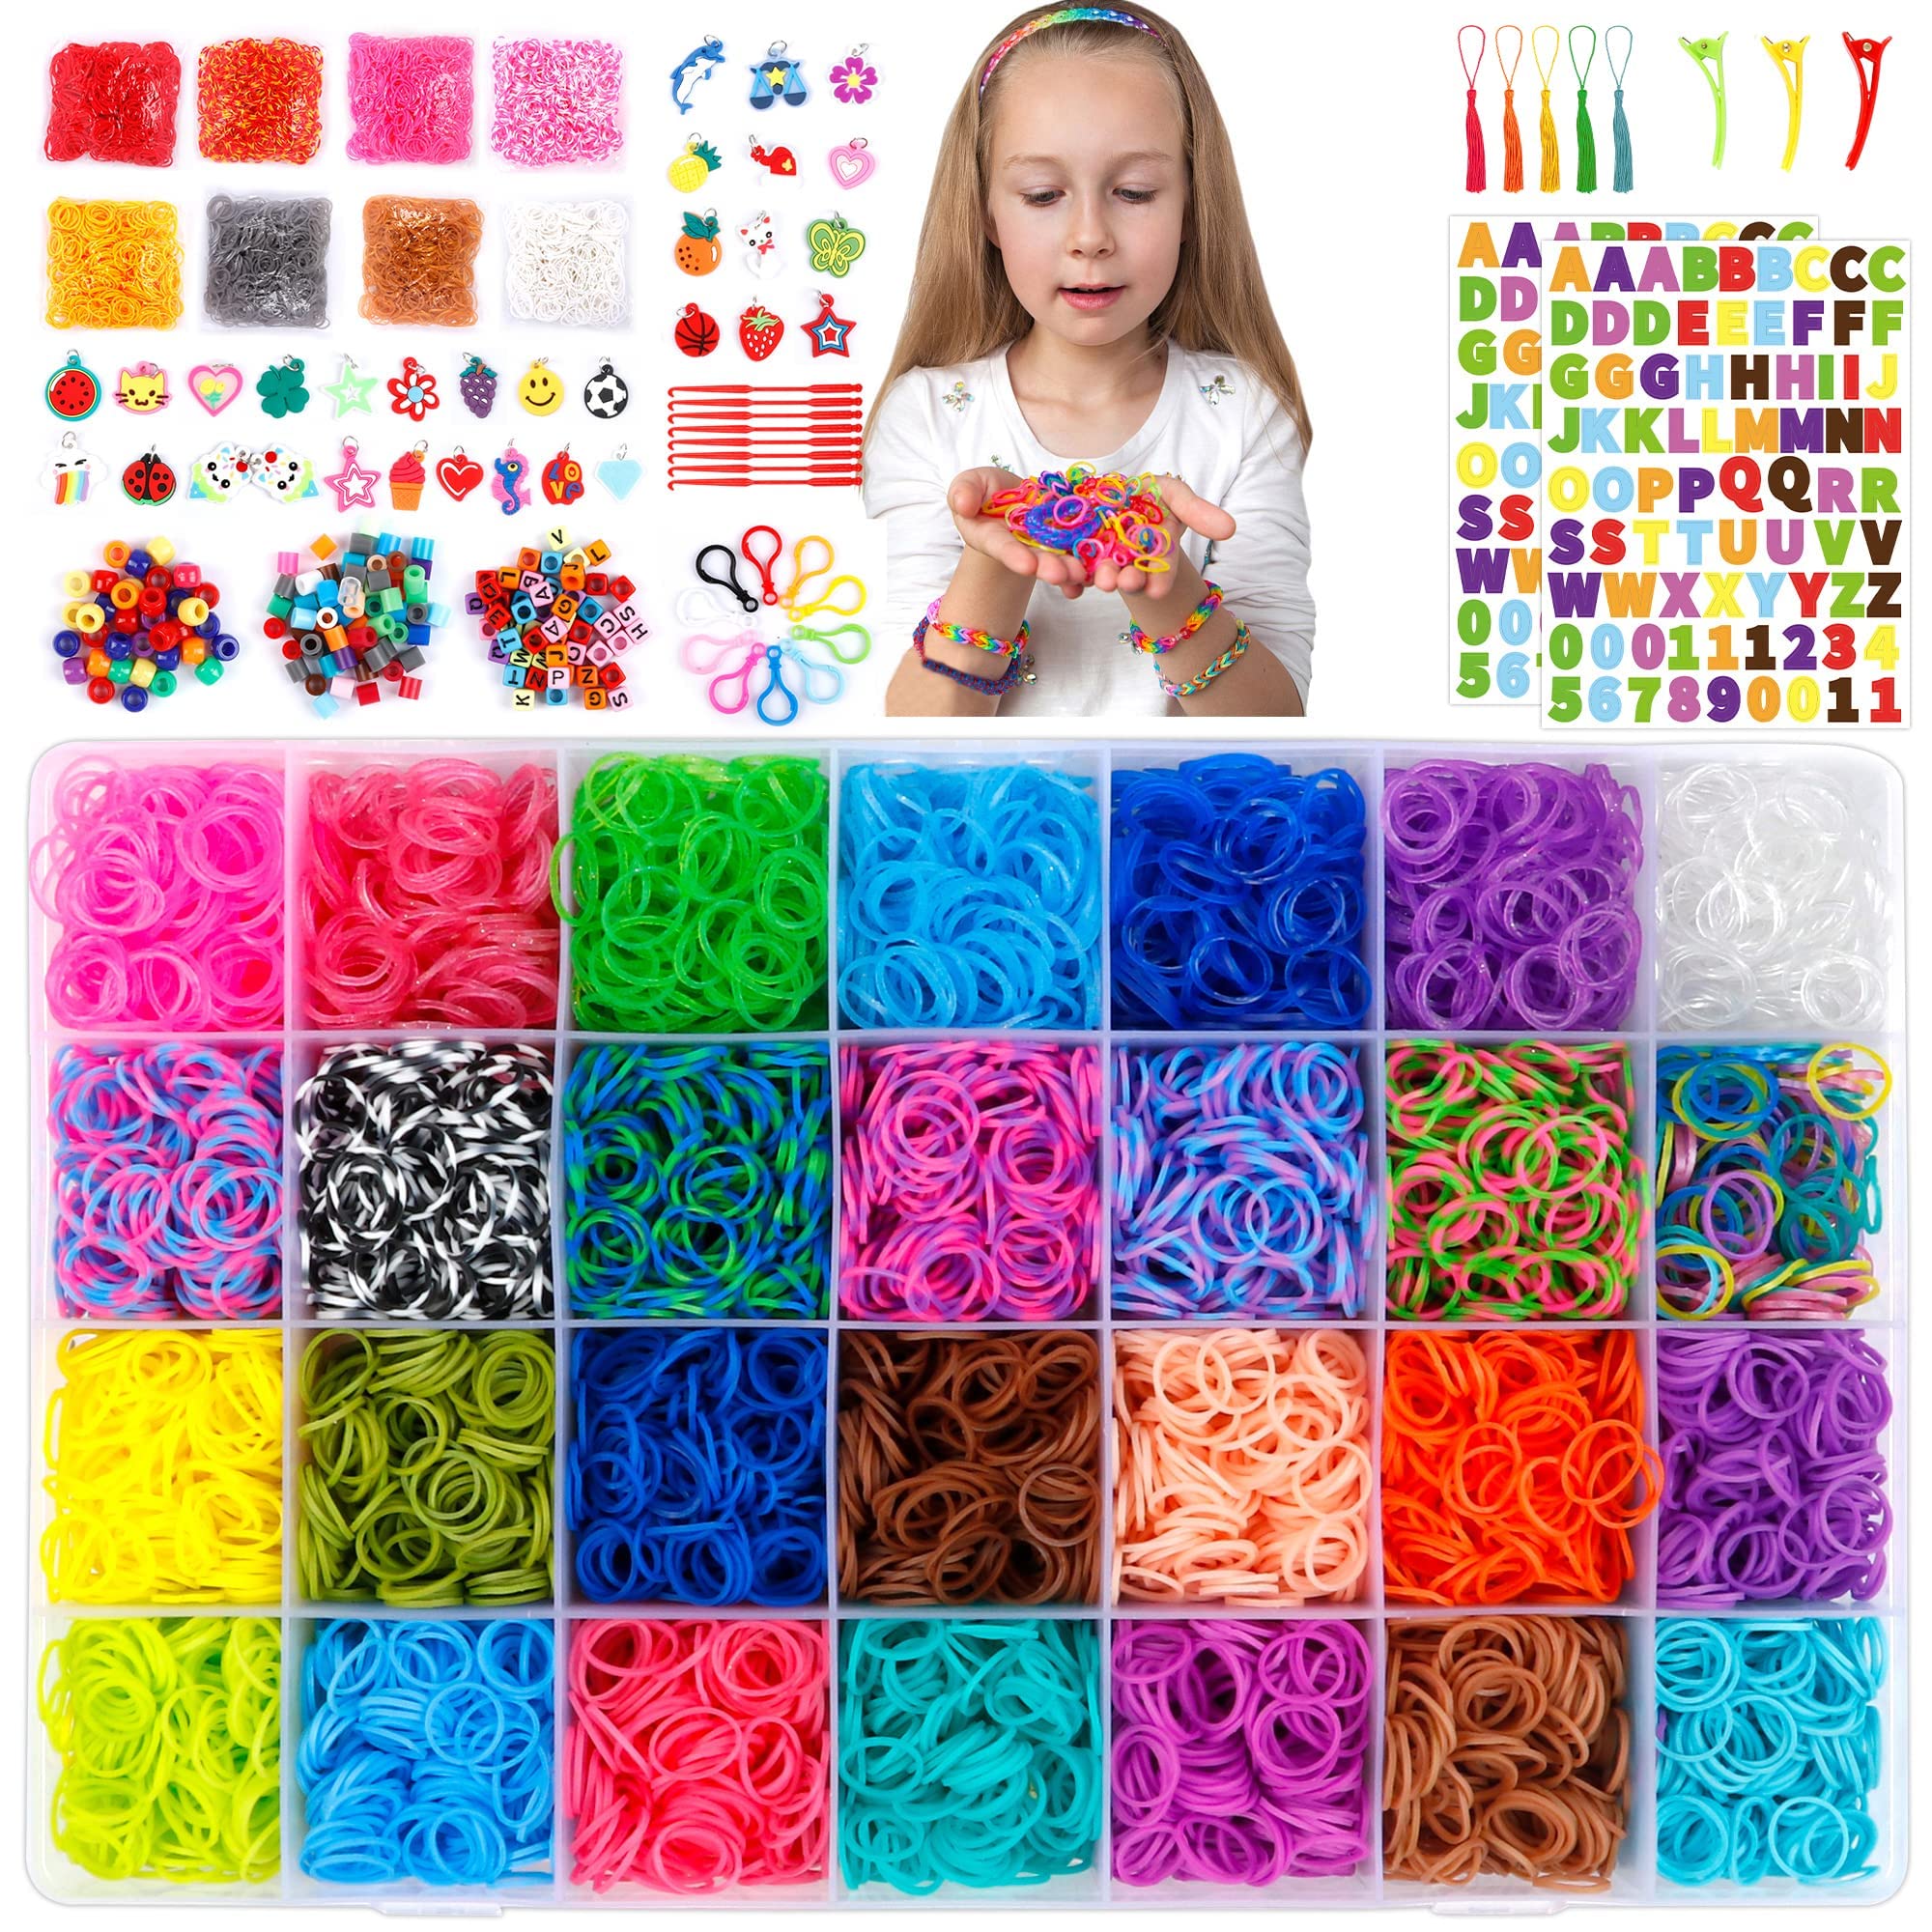 18,980+ Rubber Bands Refill Loom Kit, 37 Colors Loom Bands, 600 S-Clips,  252 Beads, Tassels, 10 Backpack Hooks, Crochet Hooks and ABC Stickers